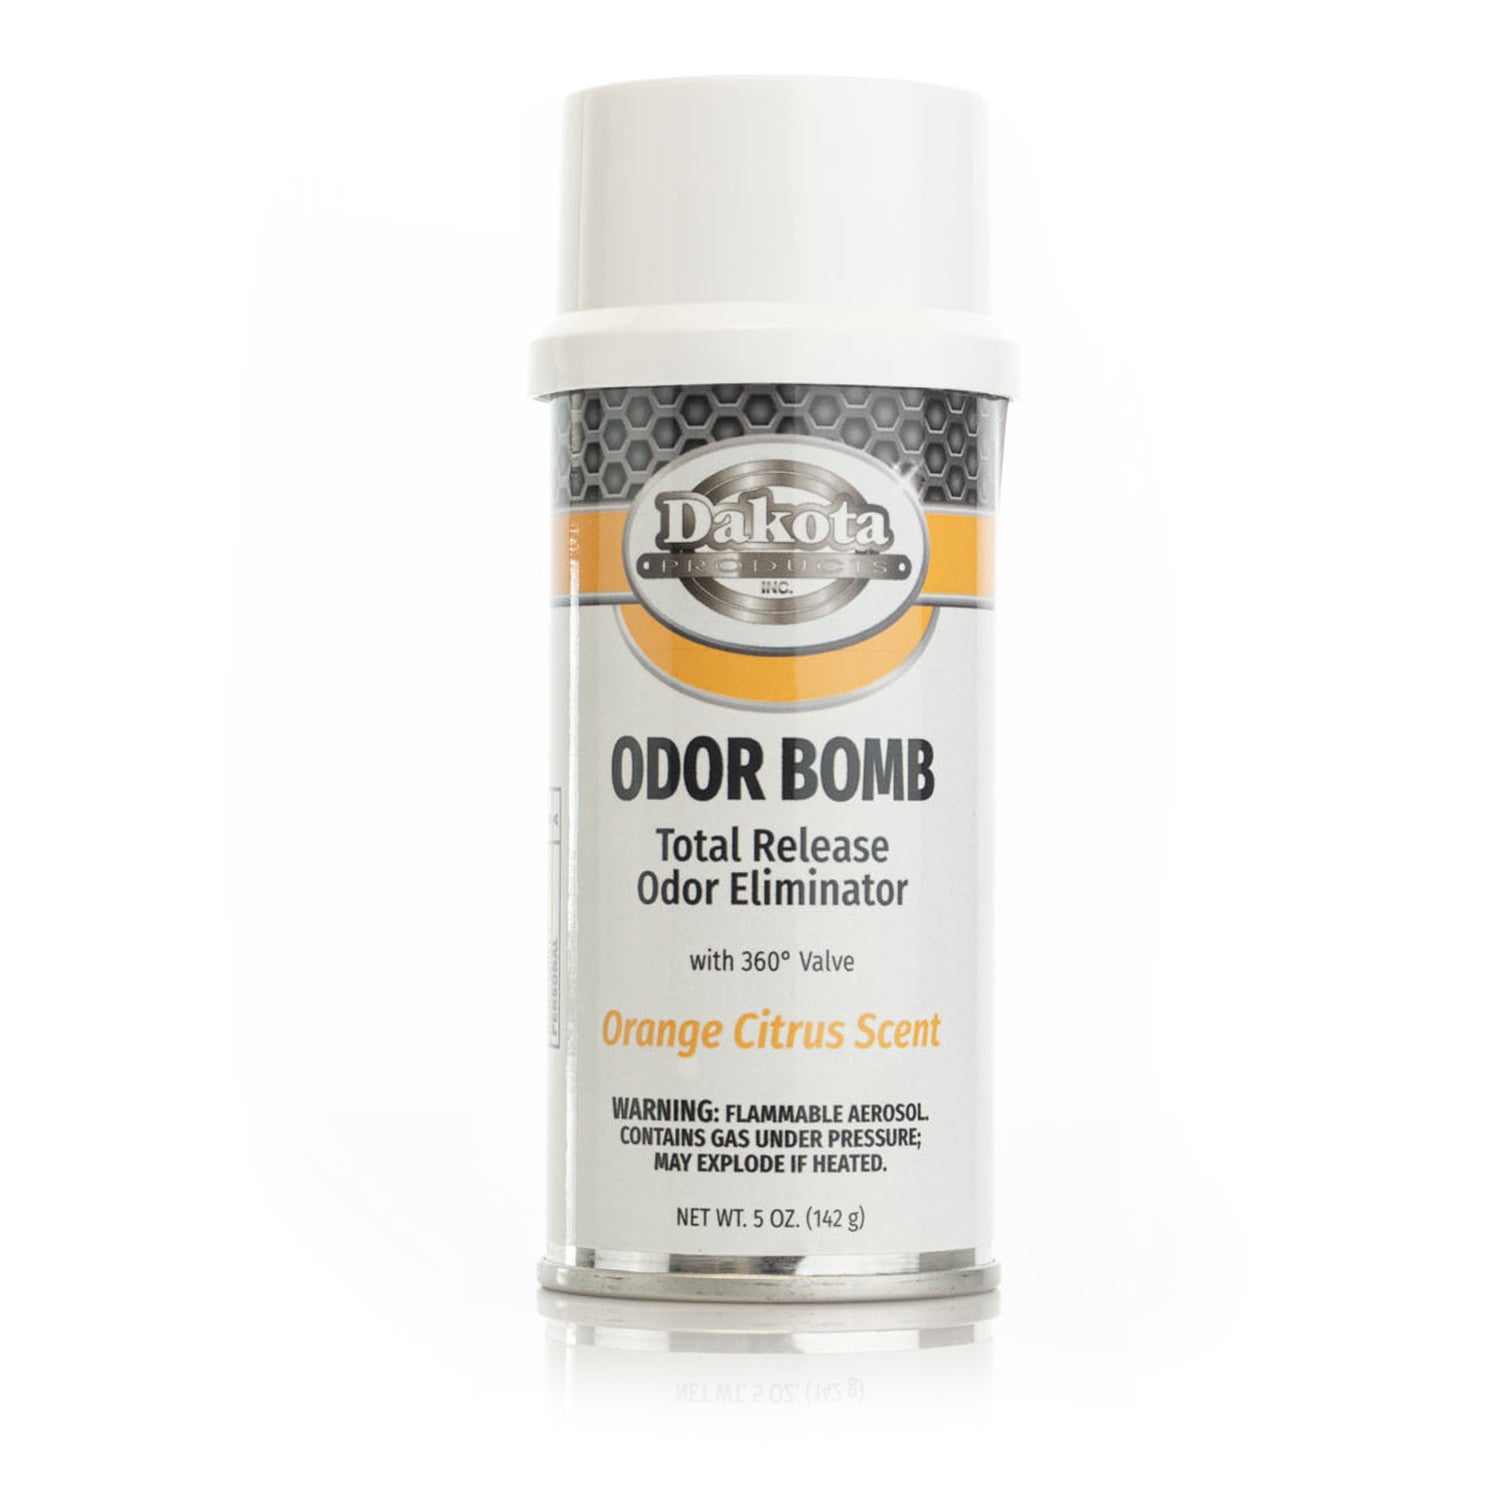 New Car Scent Odor Bombs